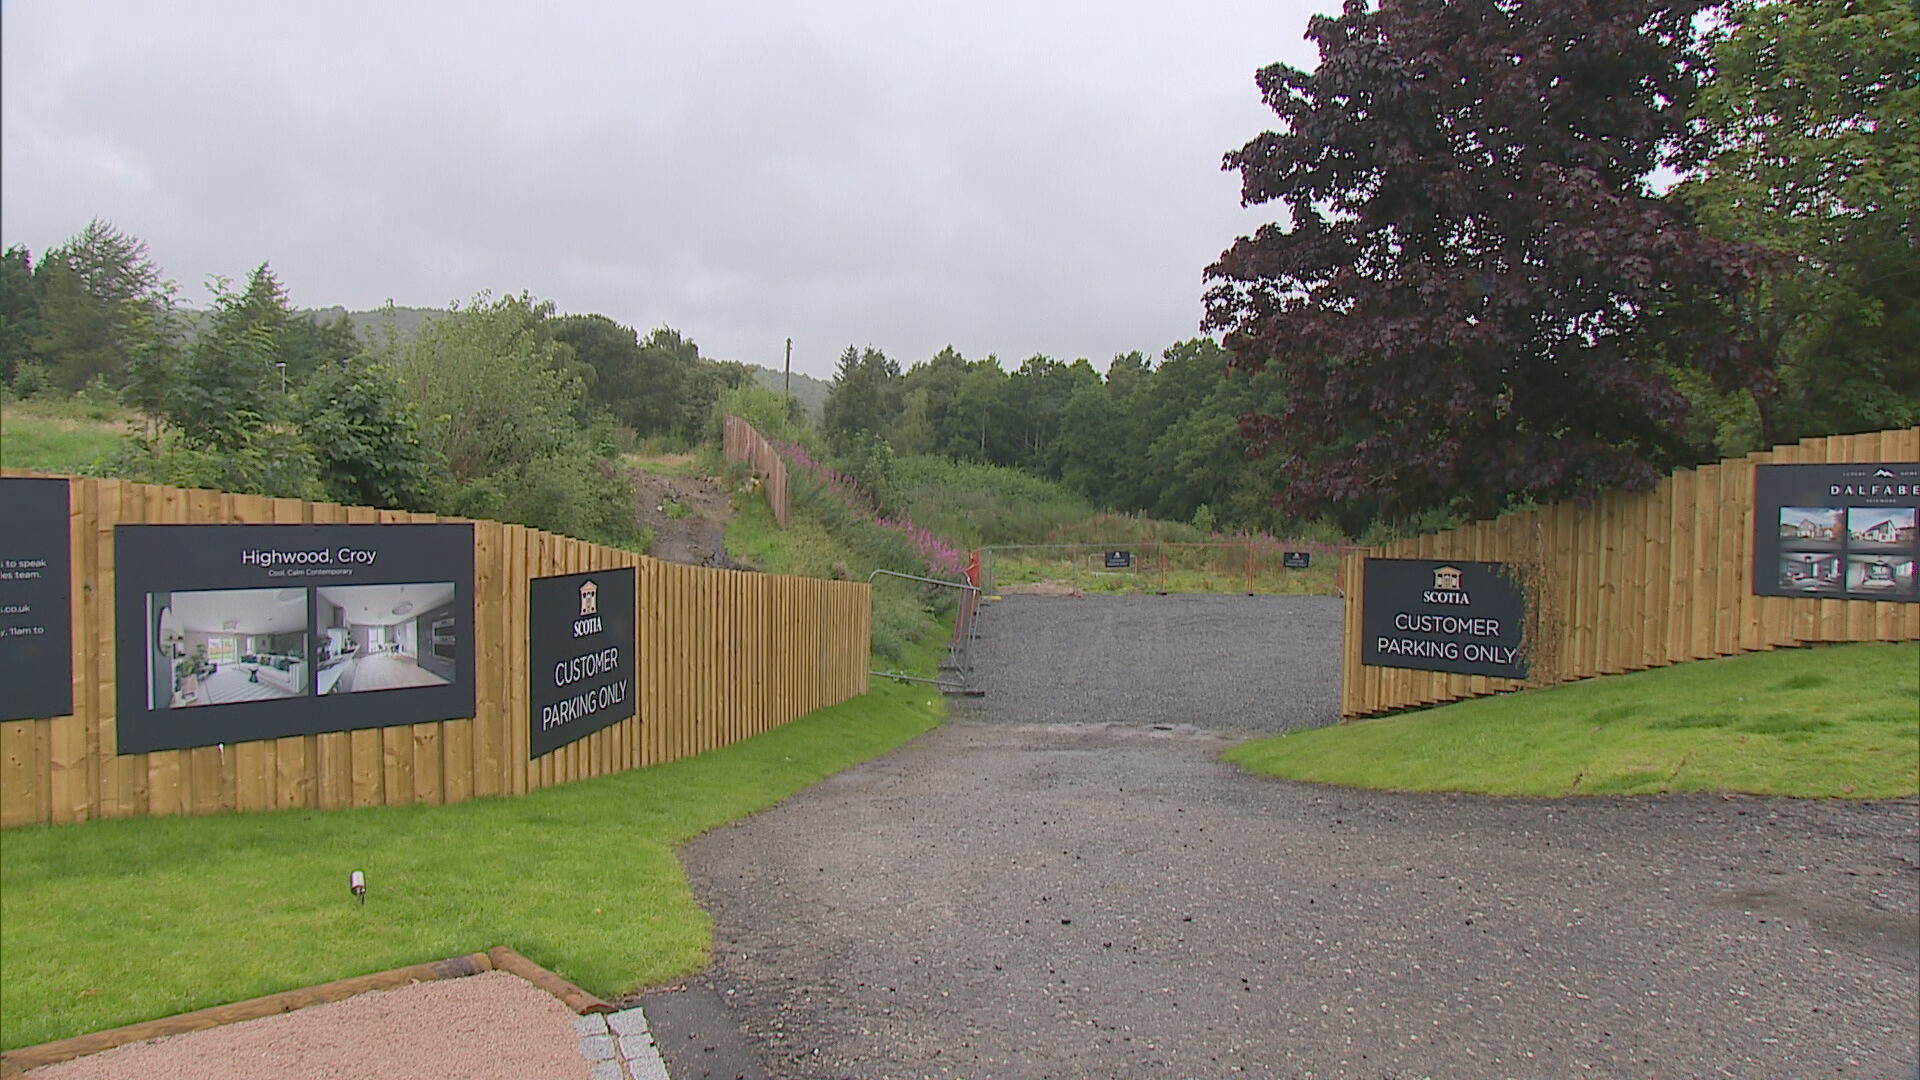 Plans for a major development in Aviemore have come under fire